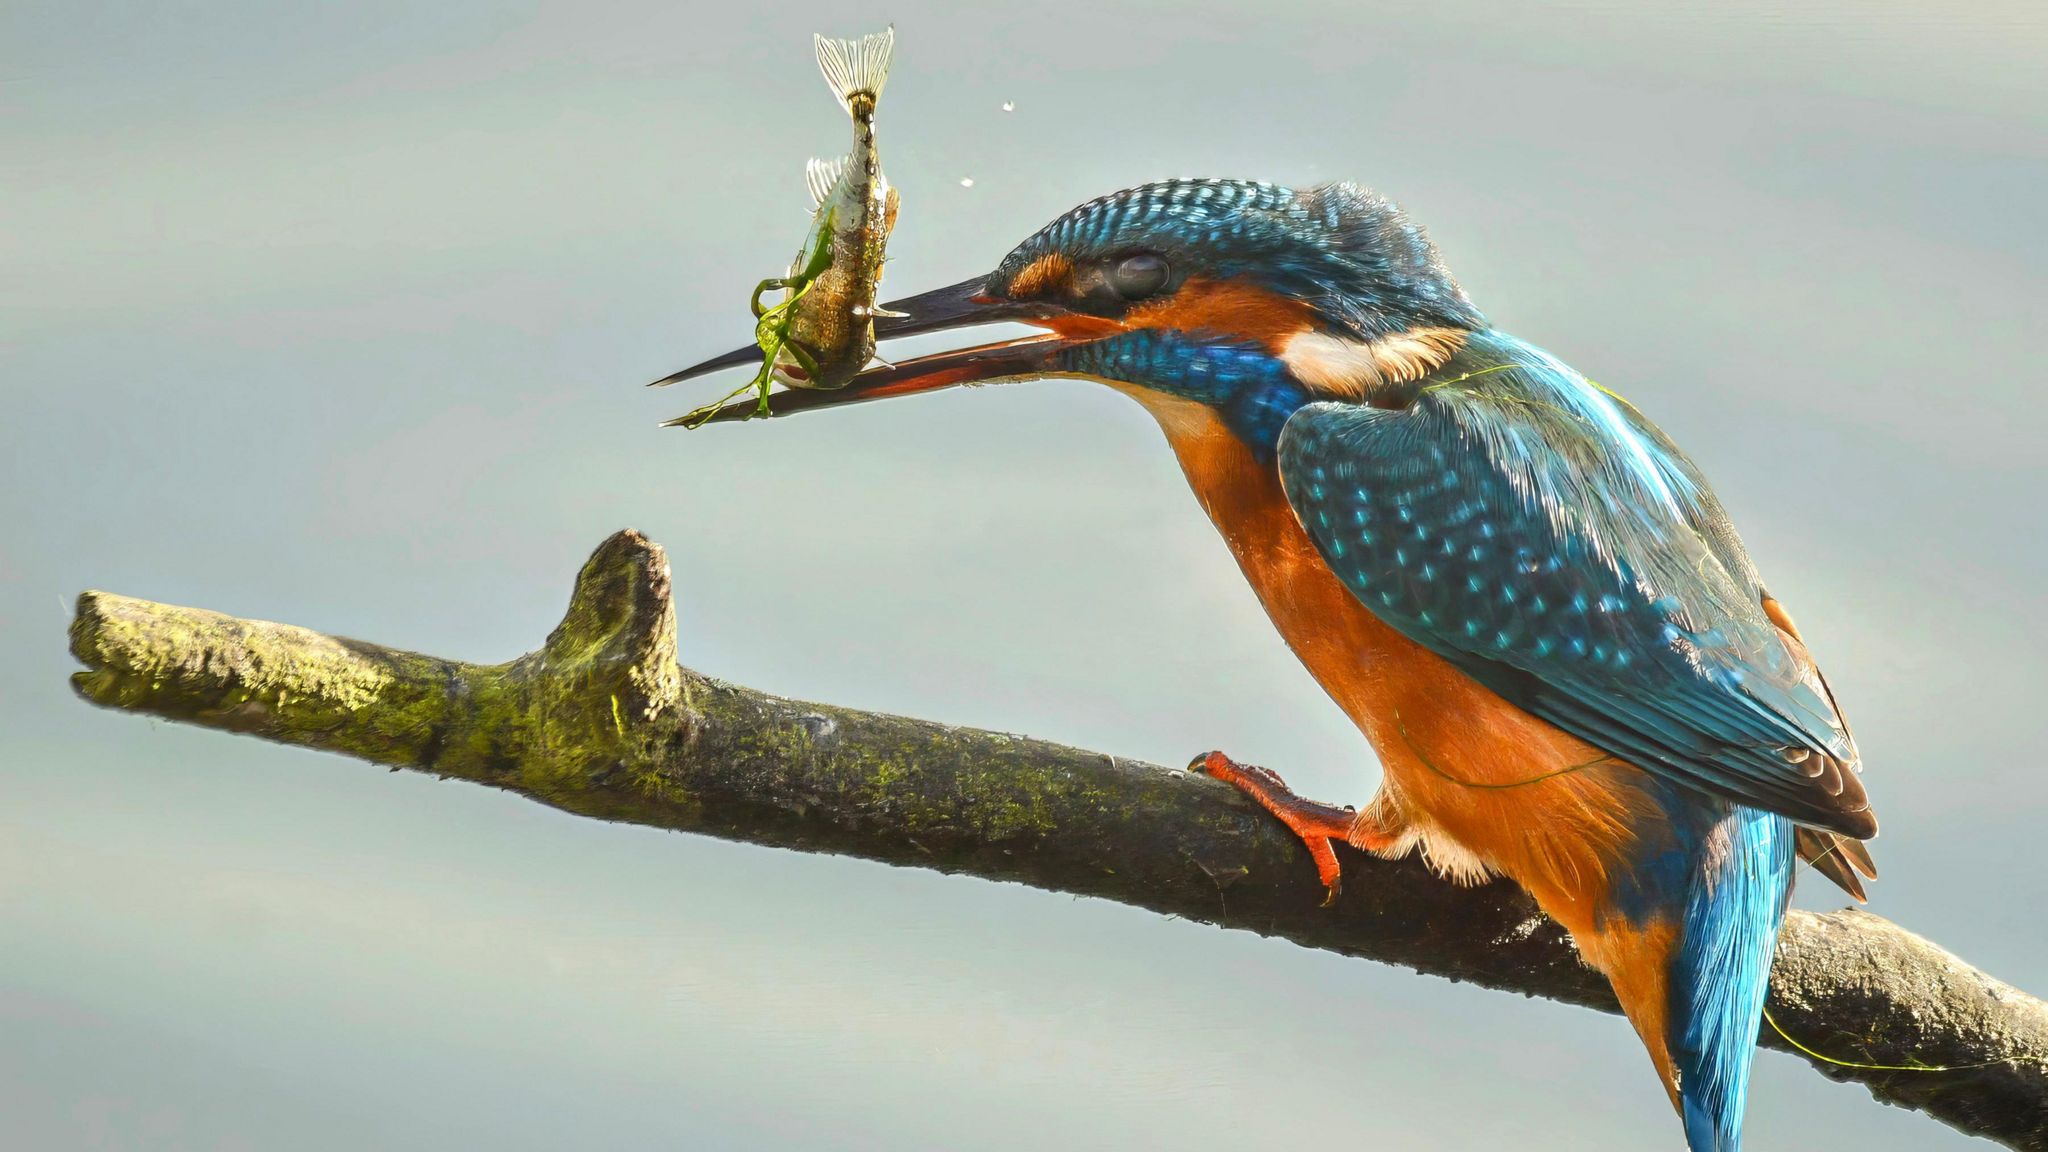 A kingfisher eating a fish